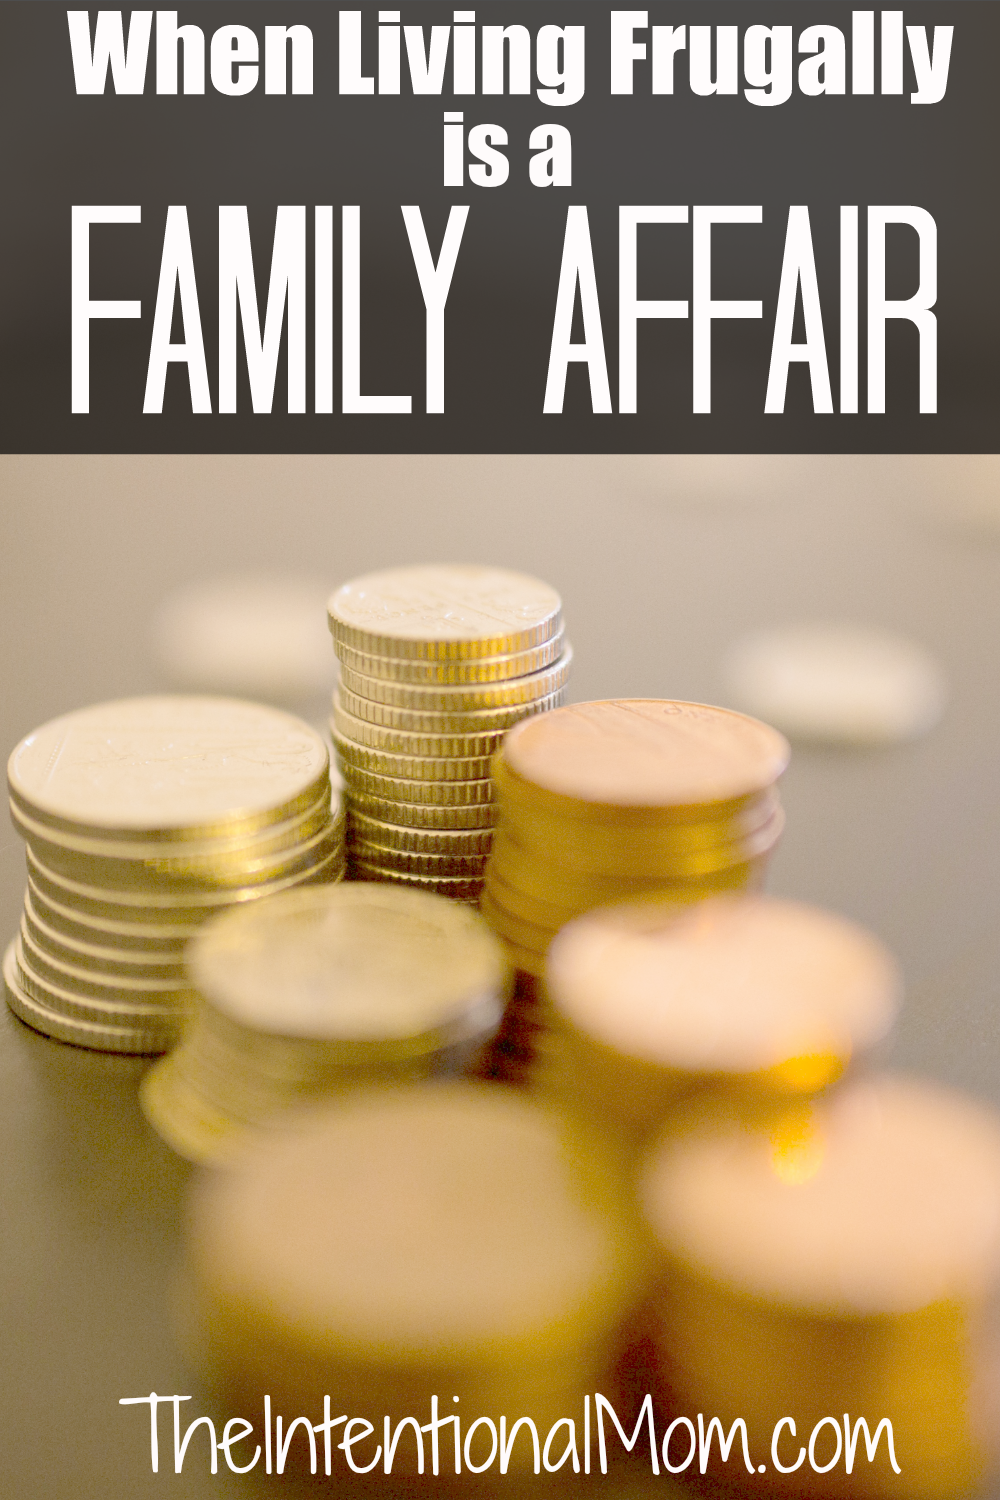 When Living Frugally is a Family Affair